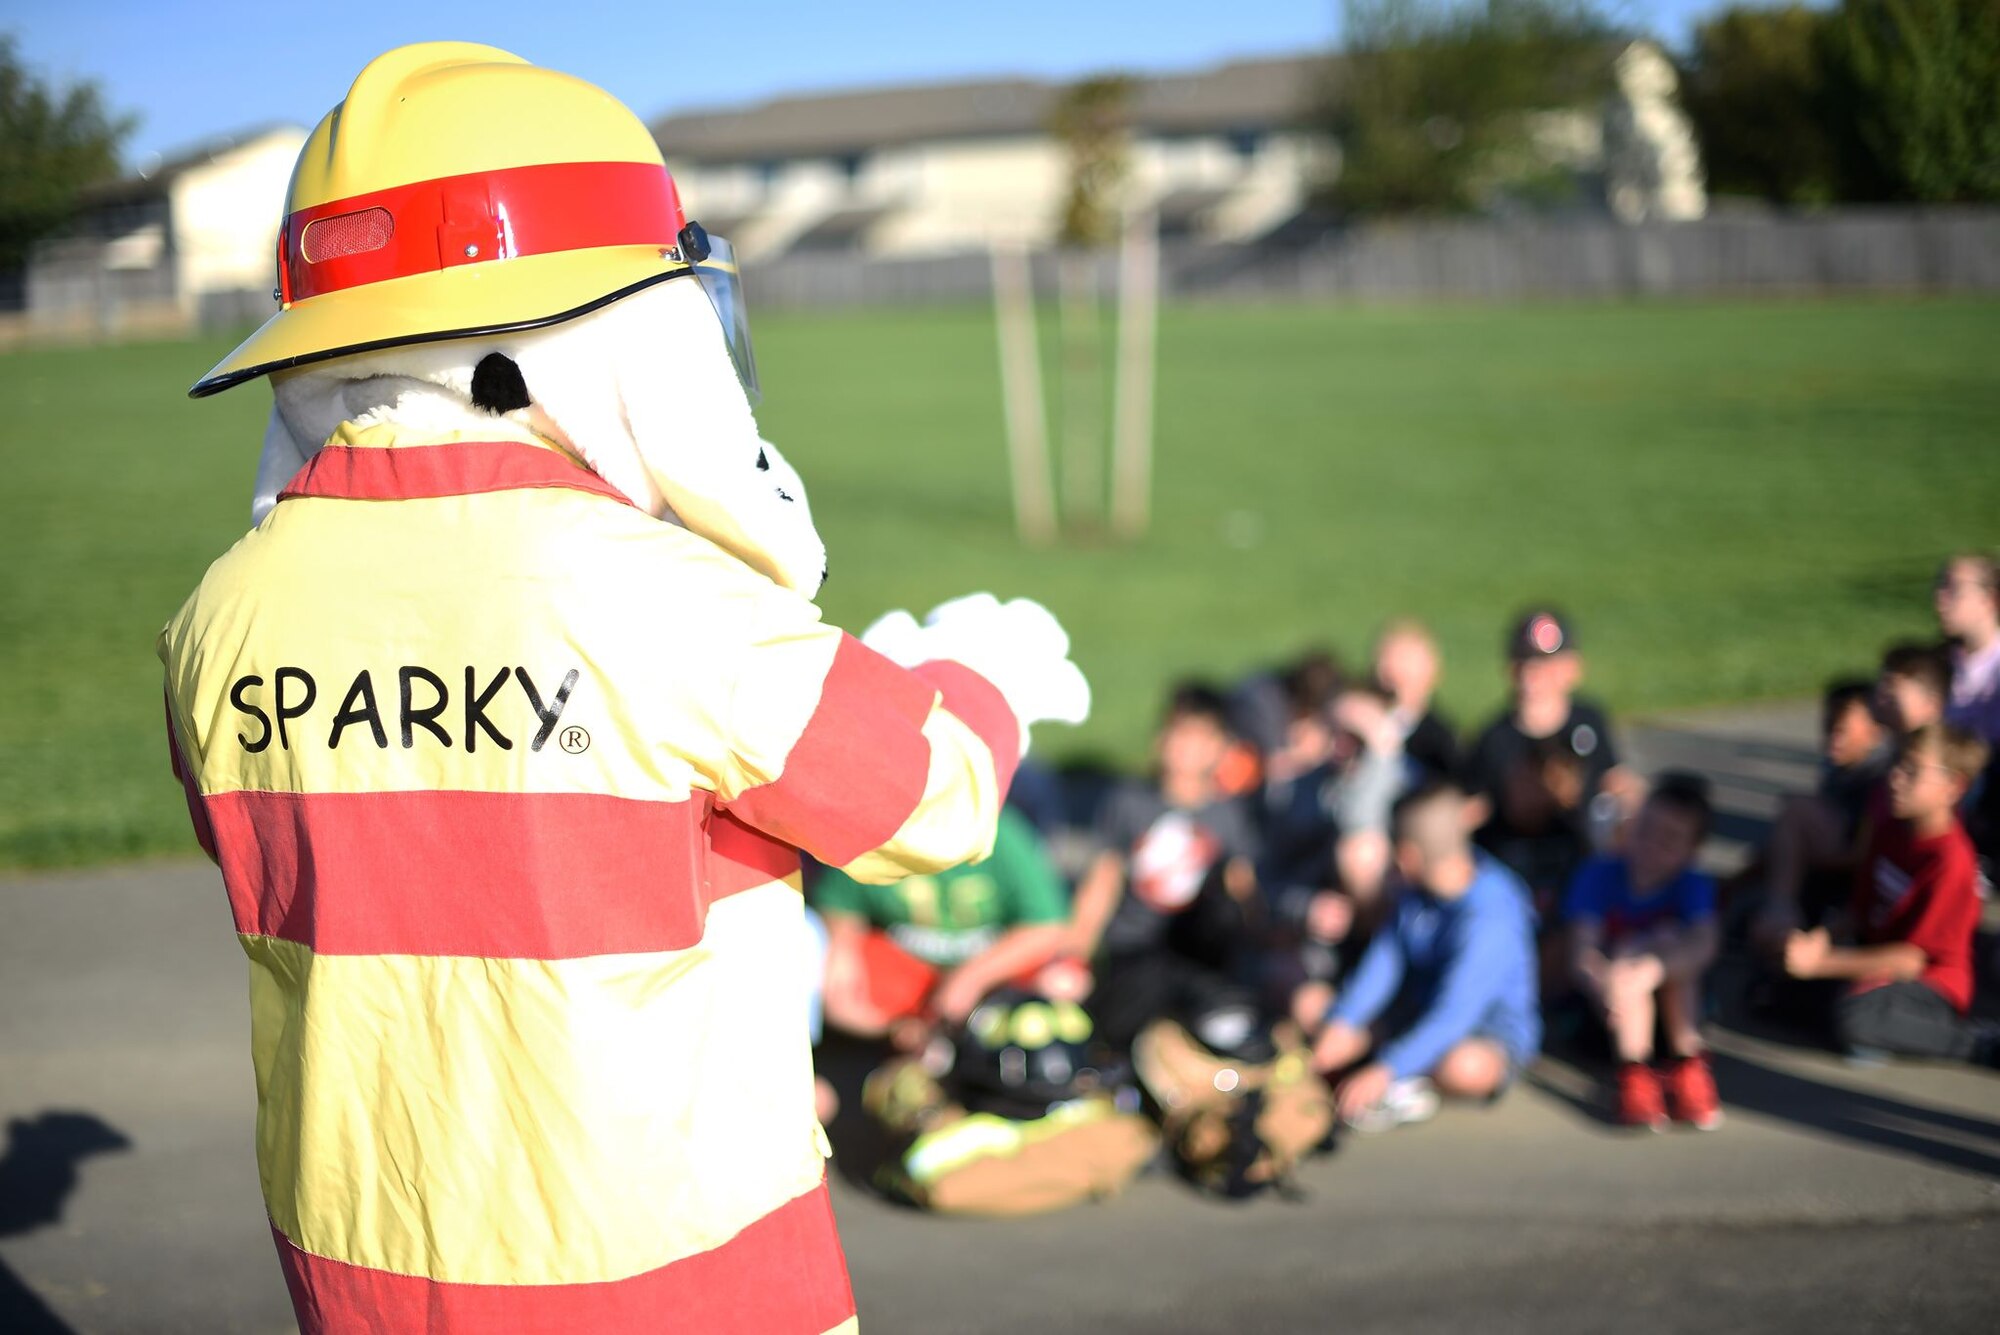 Sparky the Fire Dog, the mascot, communicates with grade school-aged children who are sitting. It is a sunny morning.